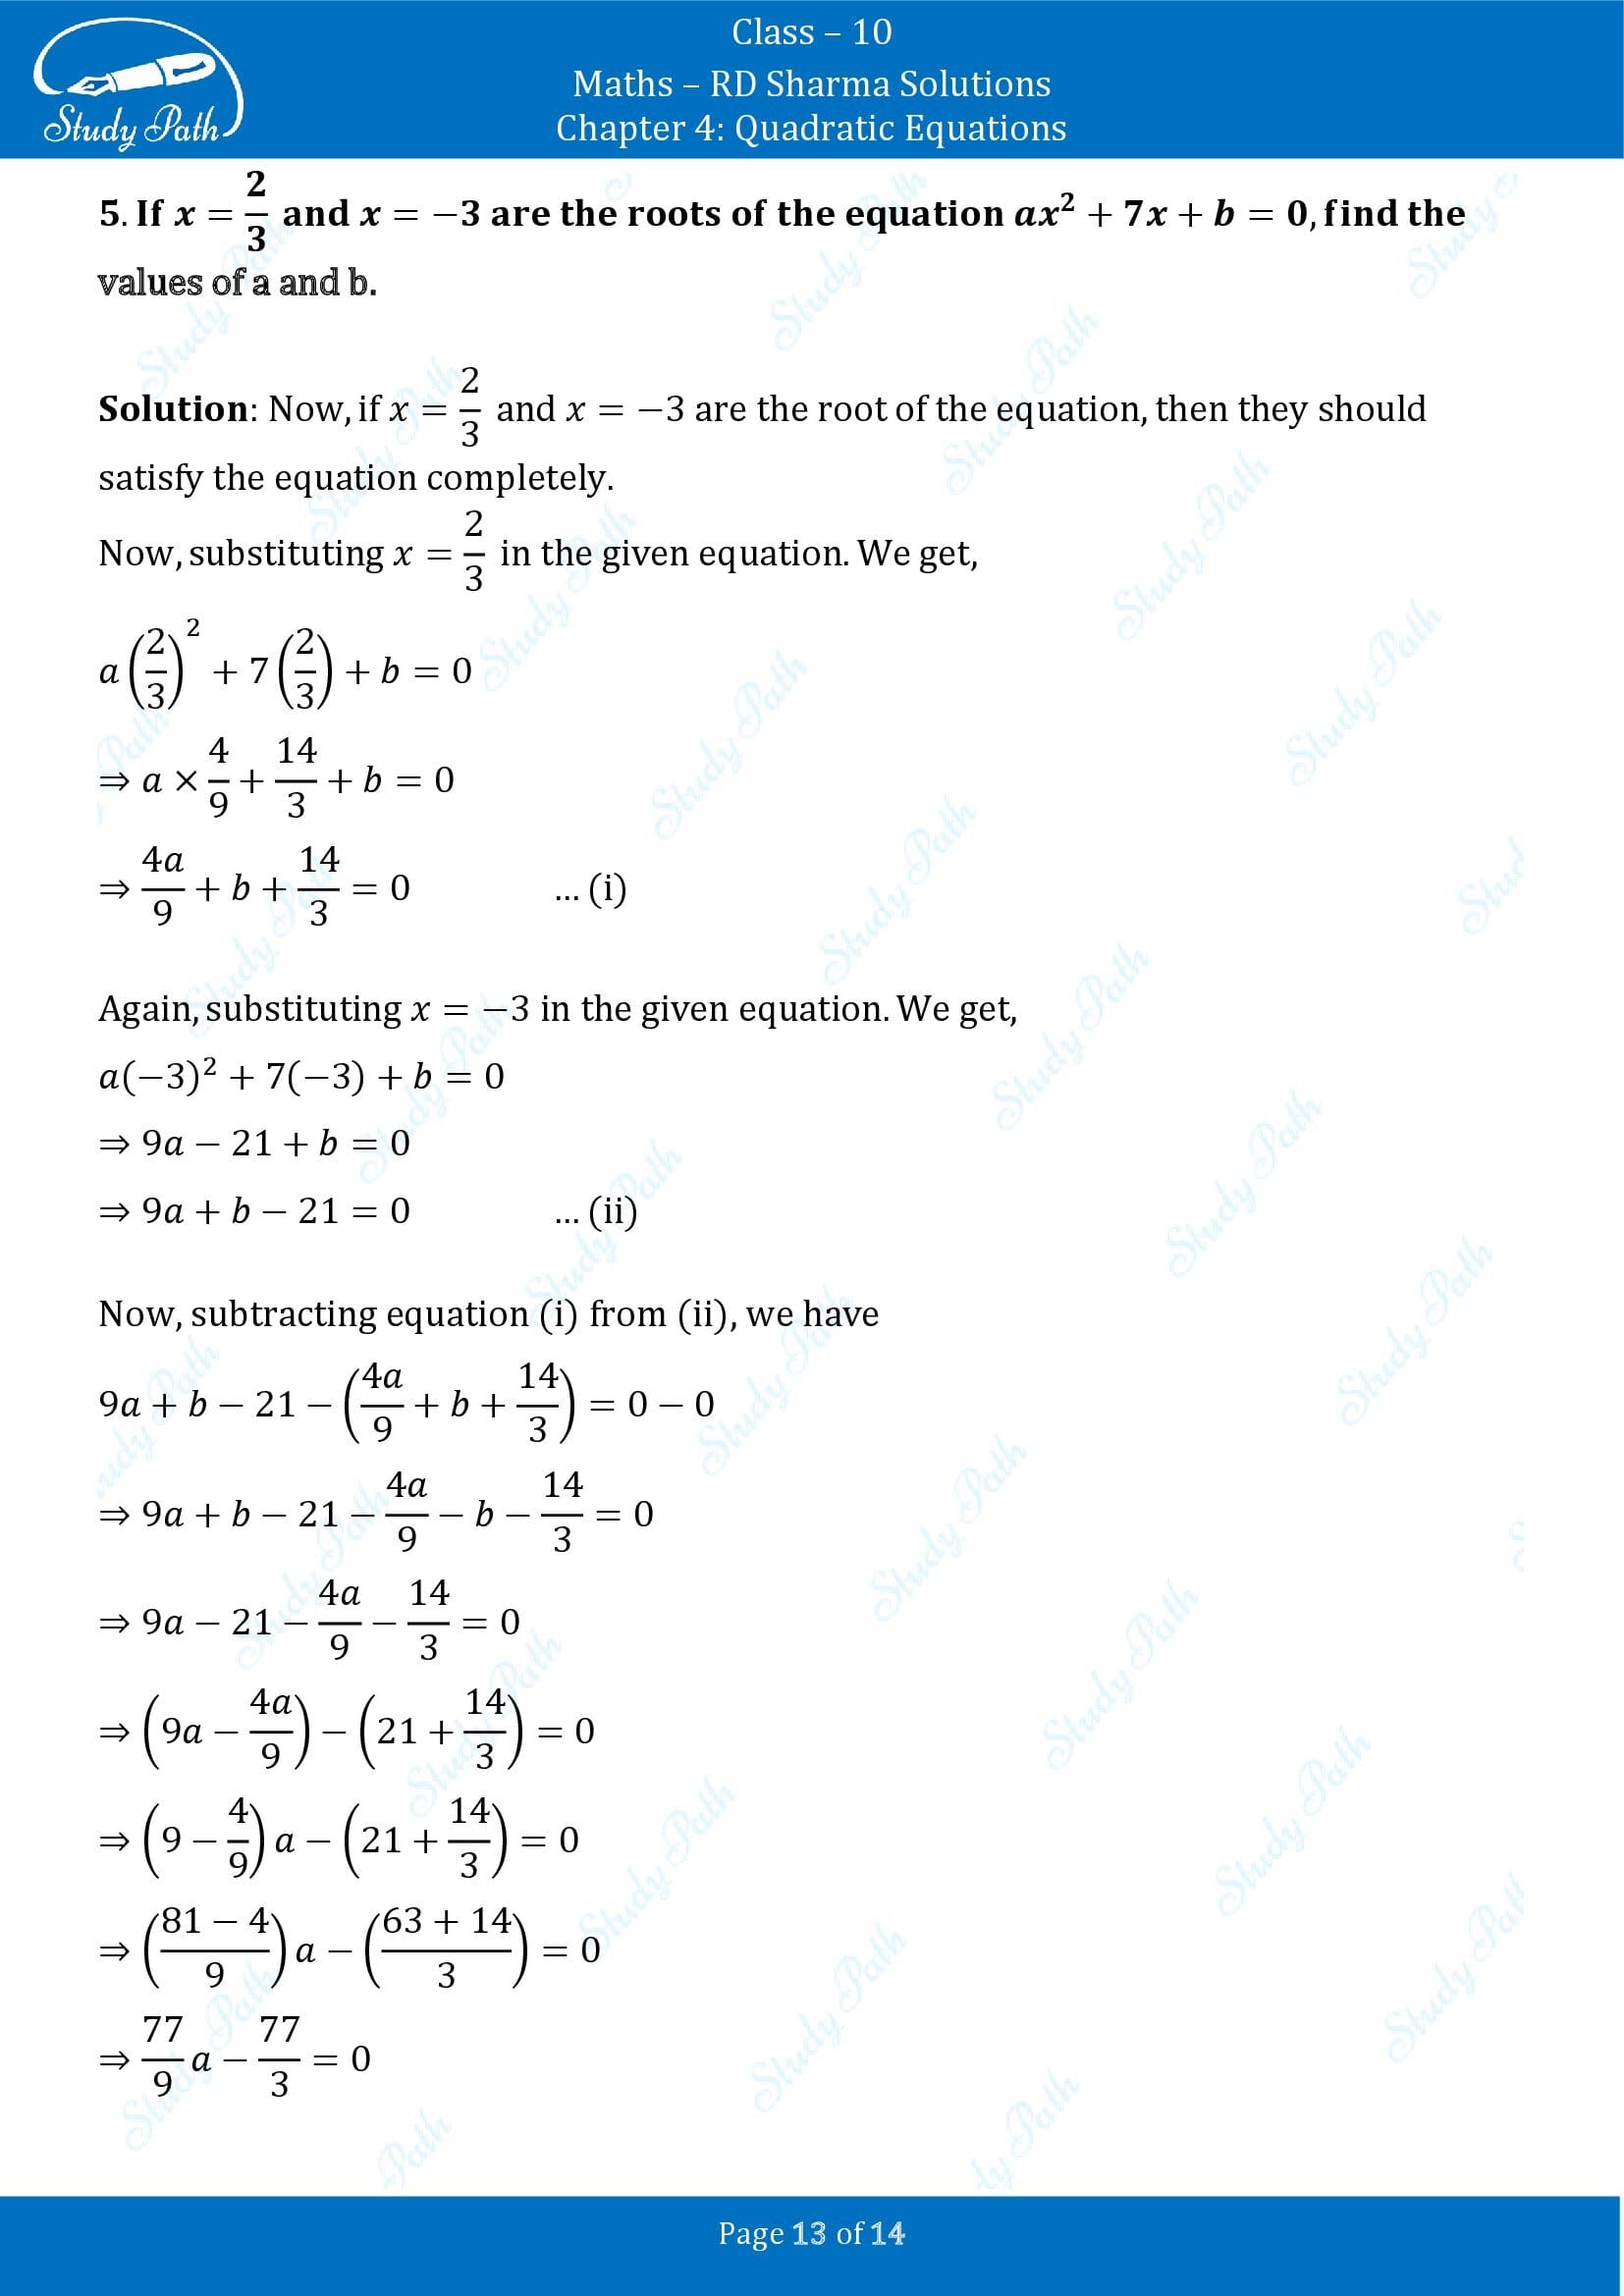 RD Sharma Solutions Class 10 Chapter 4 Quadratic Equations Exercise 4.1 00013